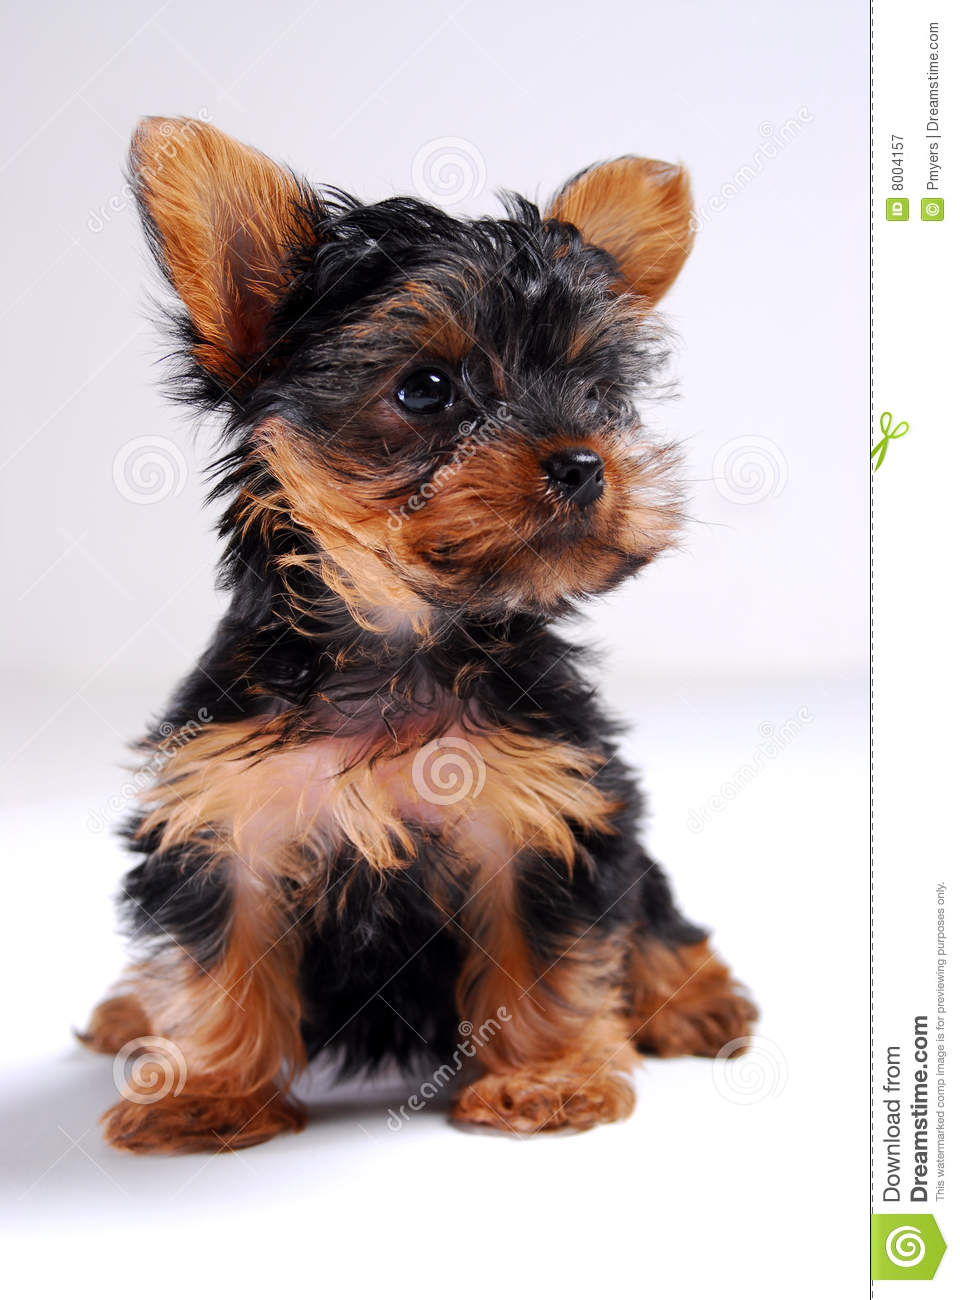 Yorkie Puppy Royalty Free Stock Photography   Image  8004157